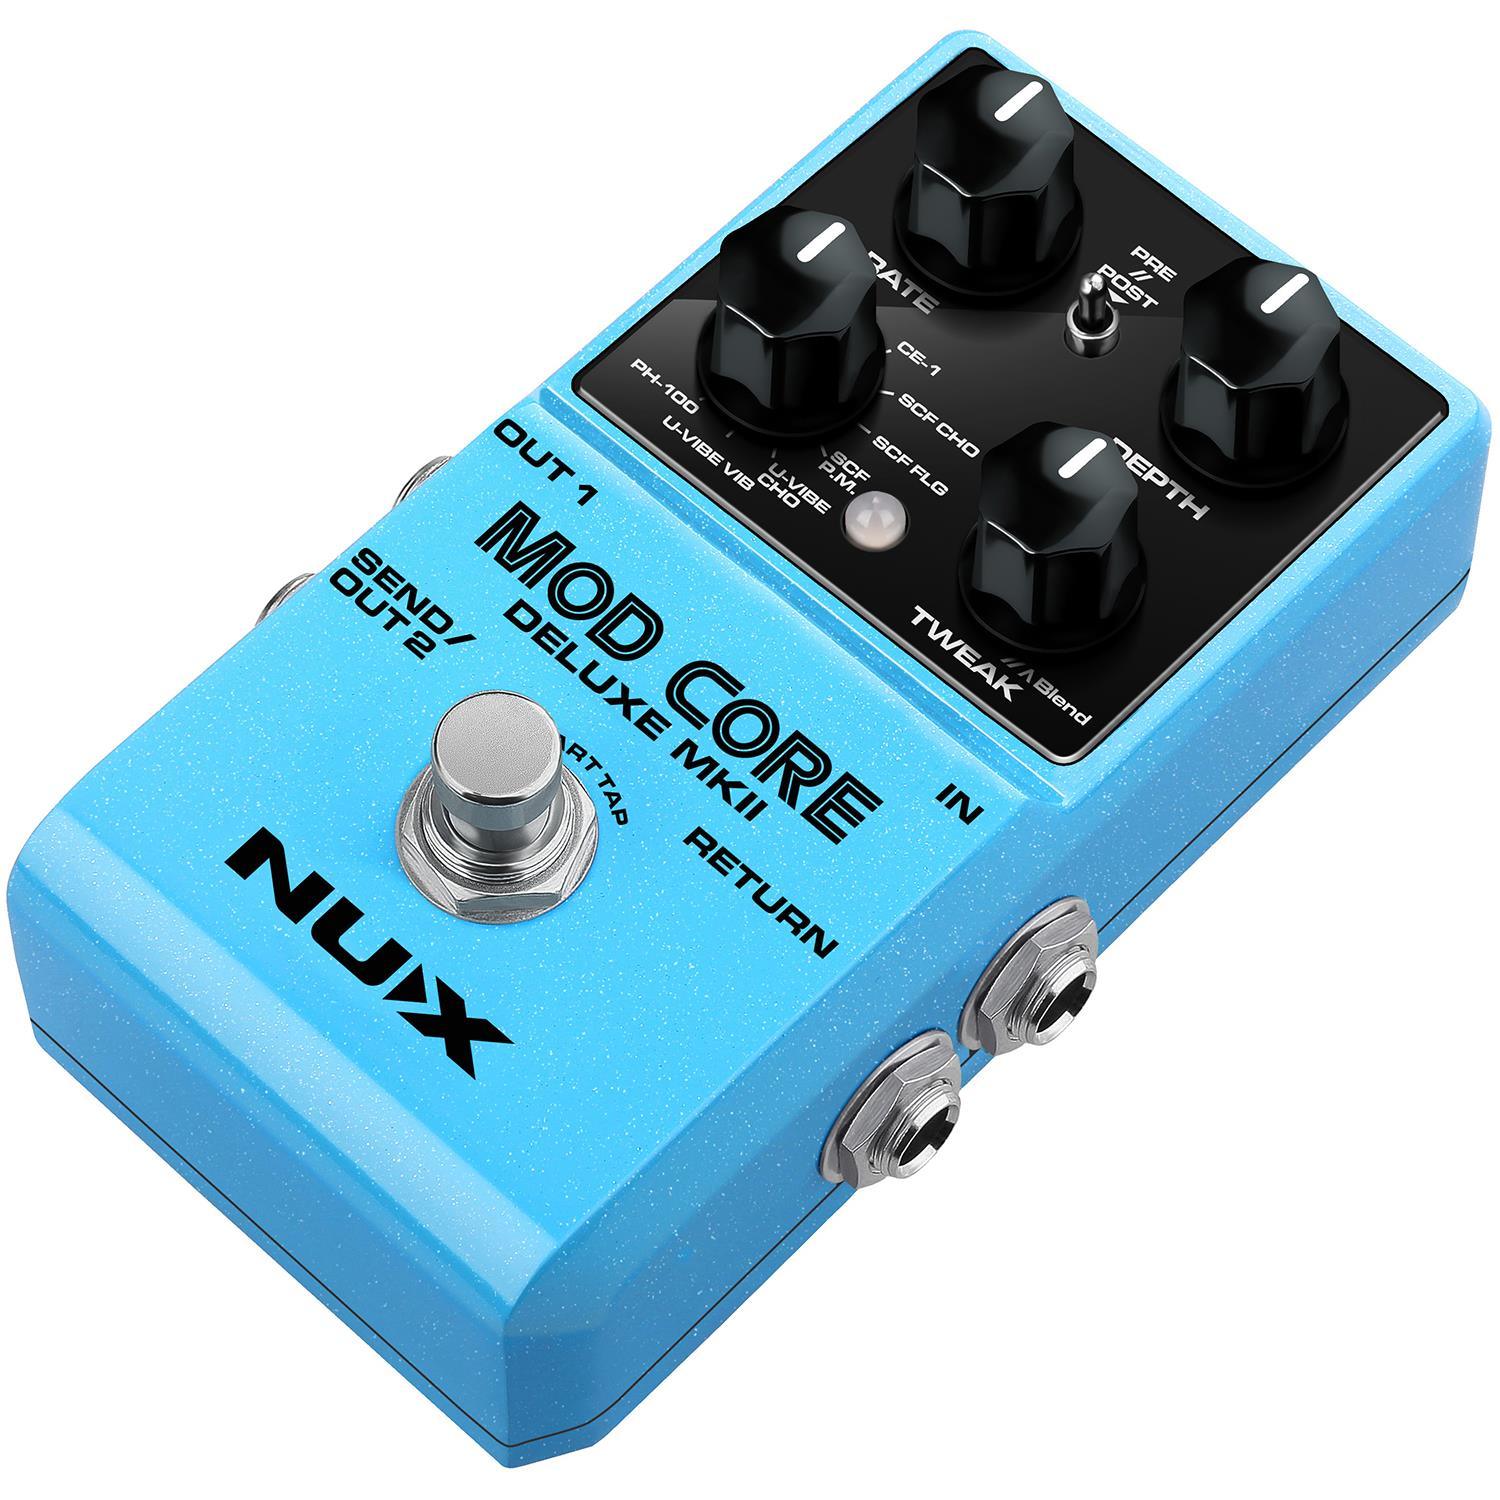 NUX Mod Core Deluxe mkII Modulation Pedal - DY Pro Audio